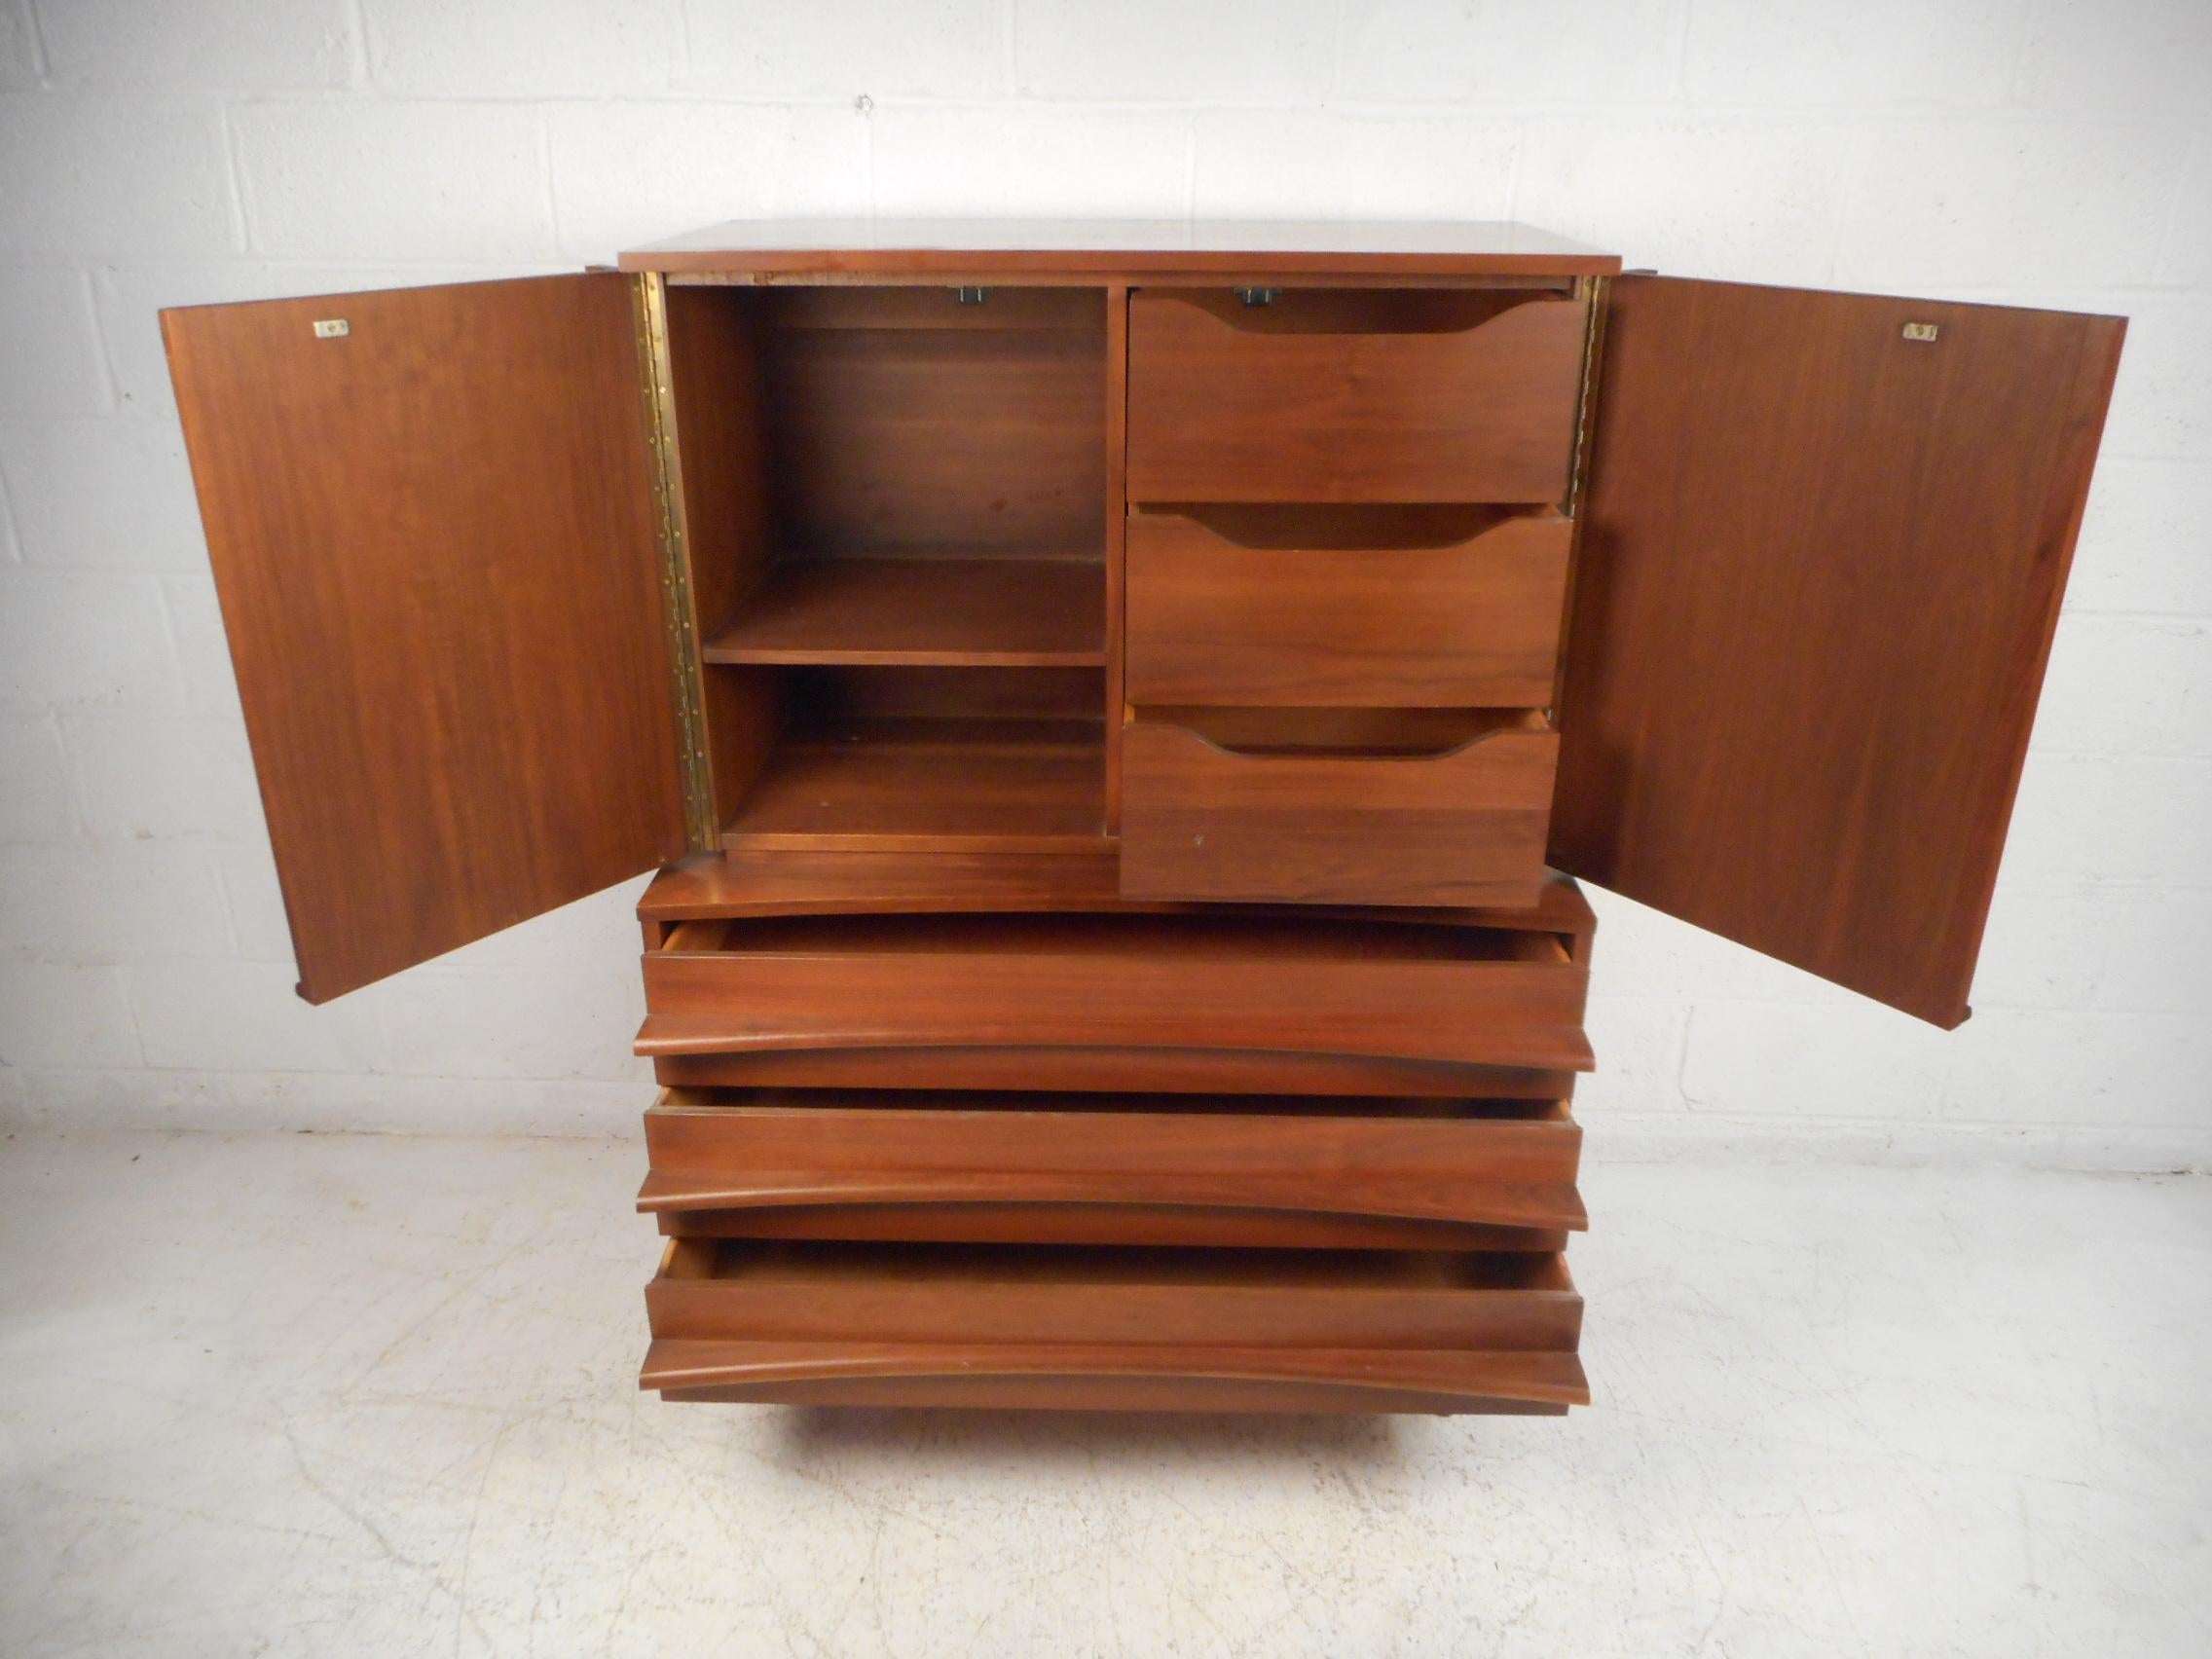 American Mid-Century Modern Highboy Dresser with Curved Drawer-Fronts